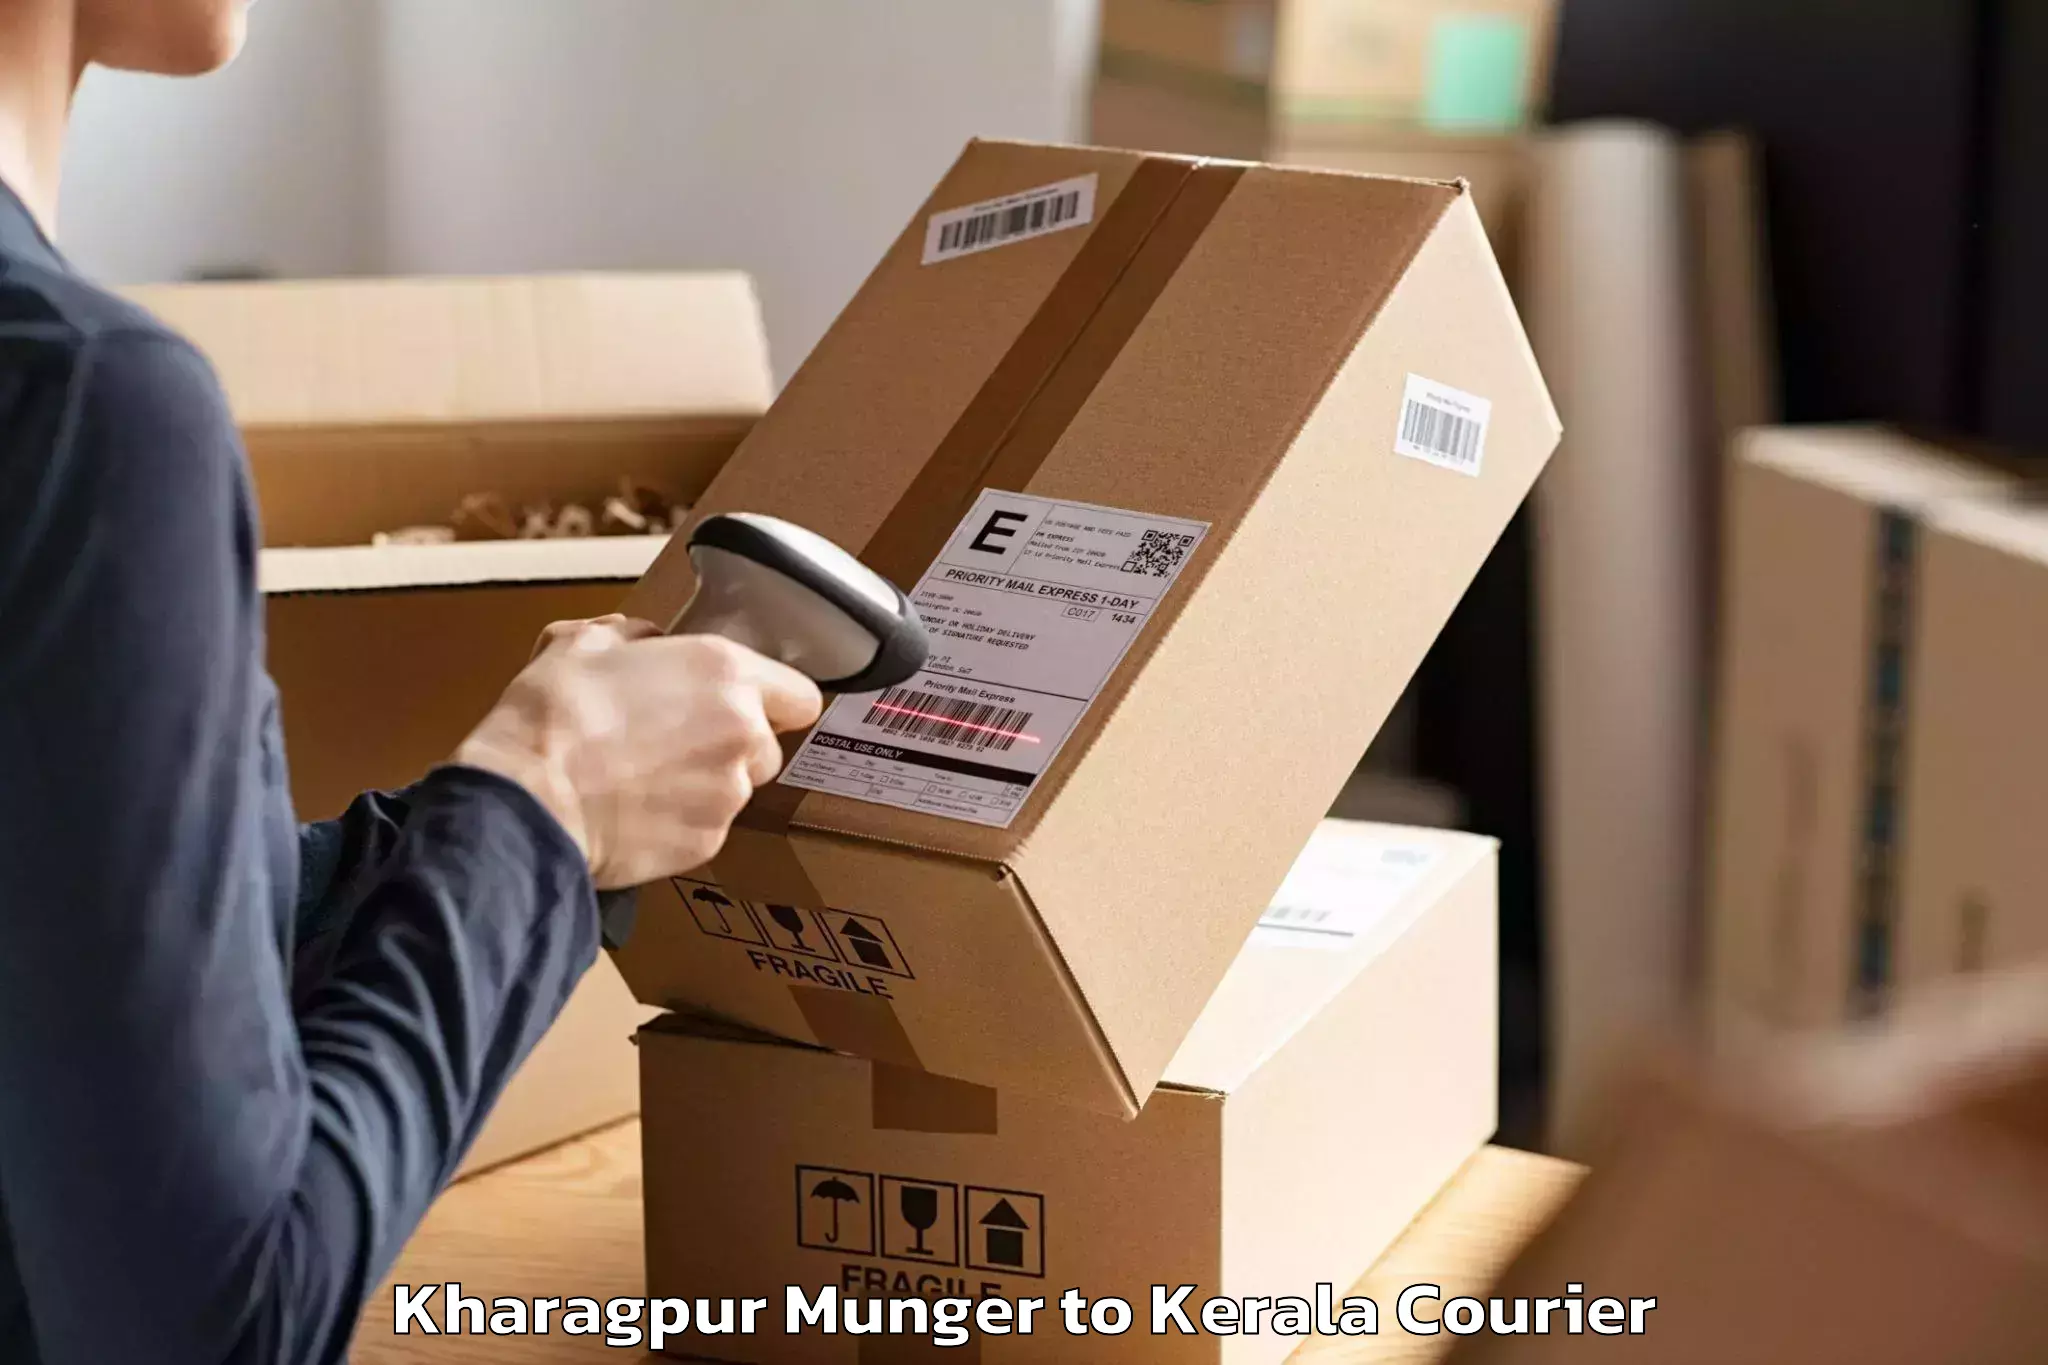 Furniture moving specialists Kharagpur Munger to Palai